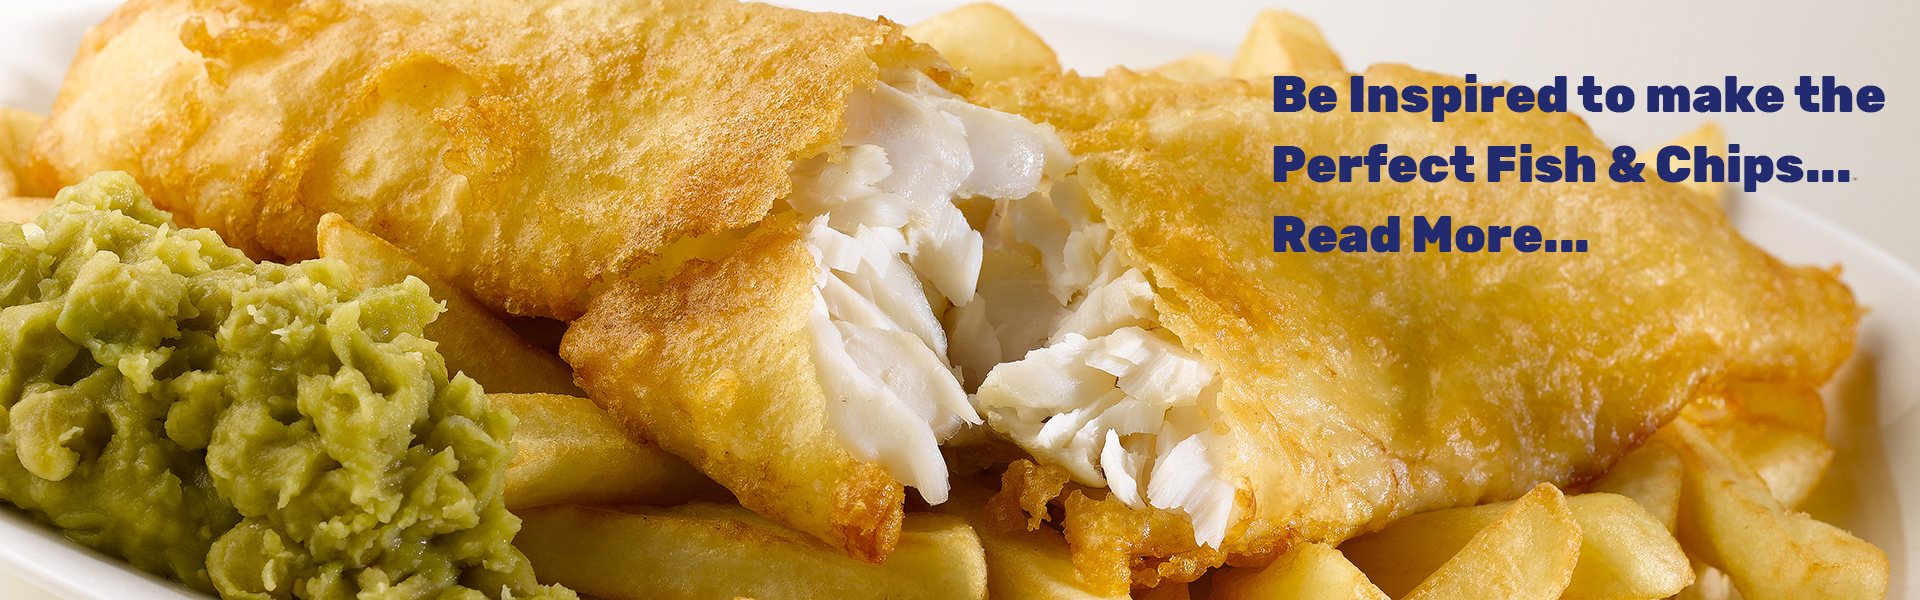 Be Inspired to Make the Perfect Fish & Chips